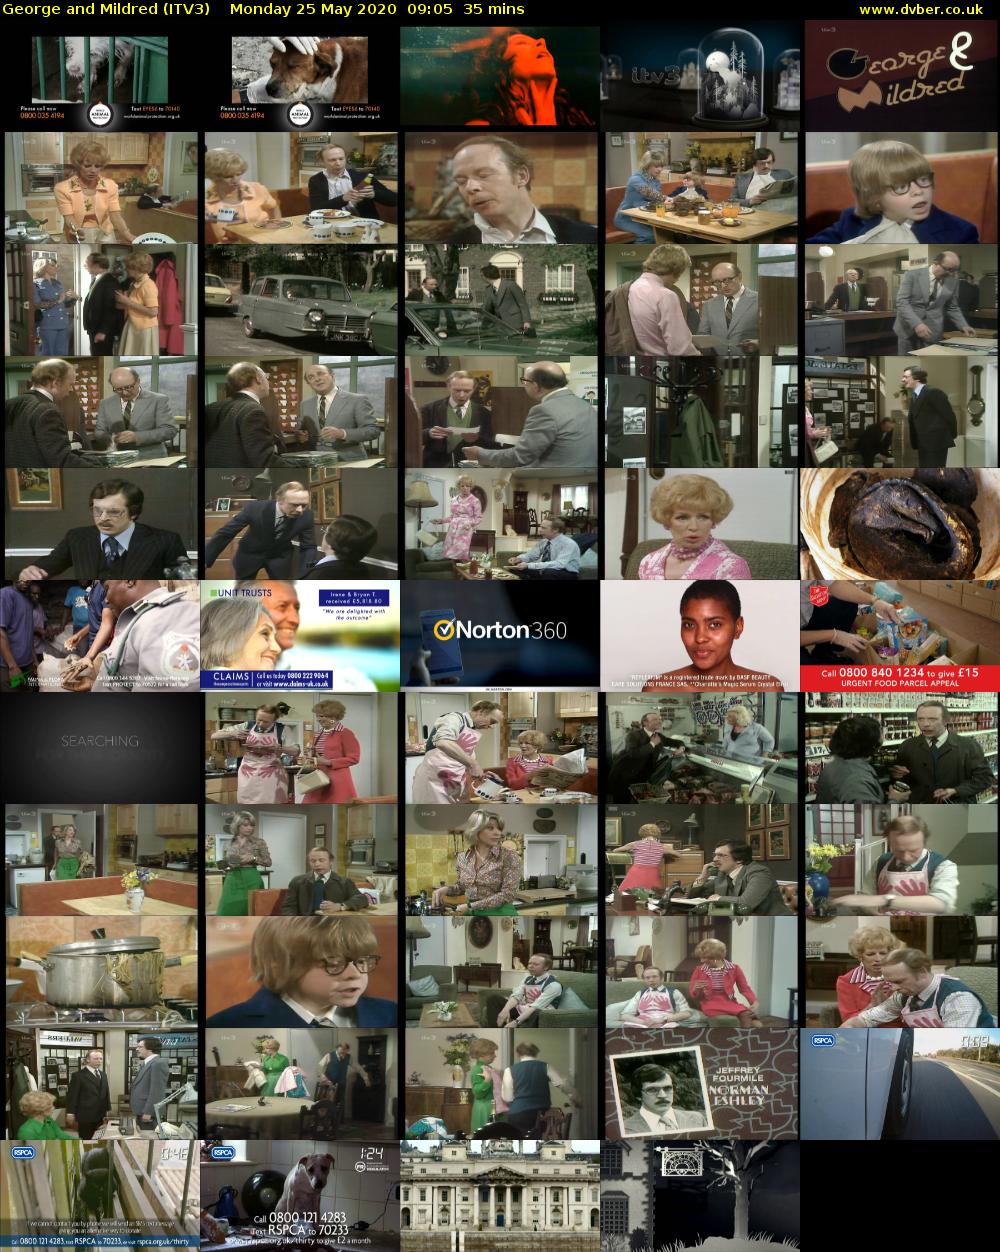 George and Mildred (ITV3) Monday 25 May 2020 09:05 - 09:40